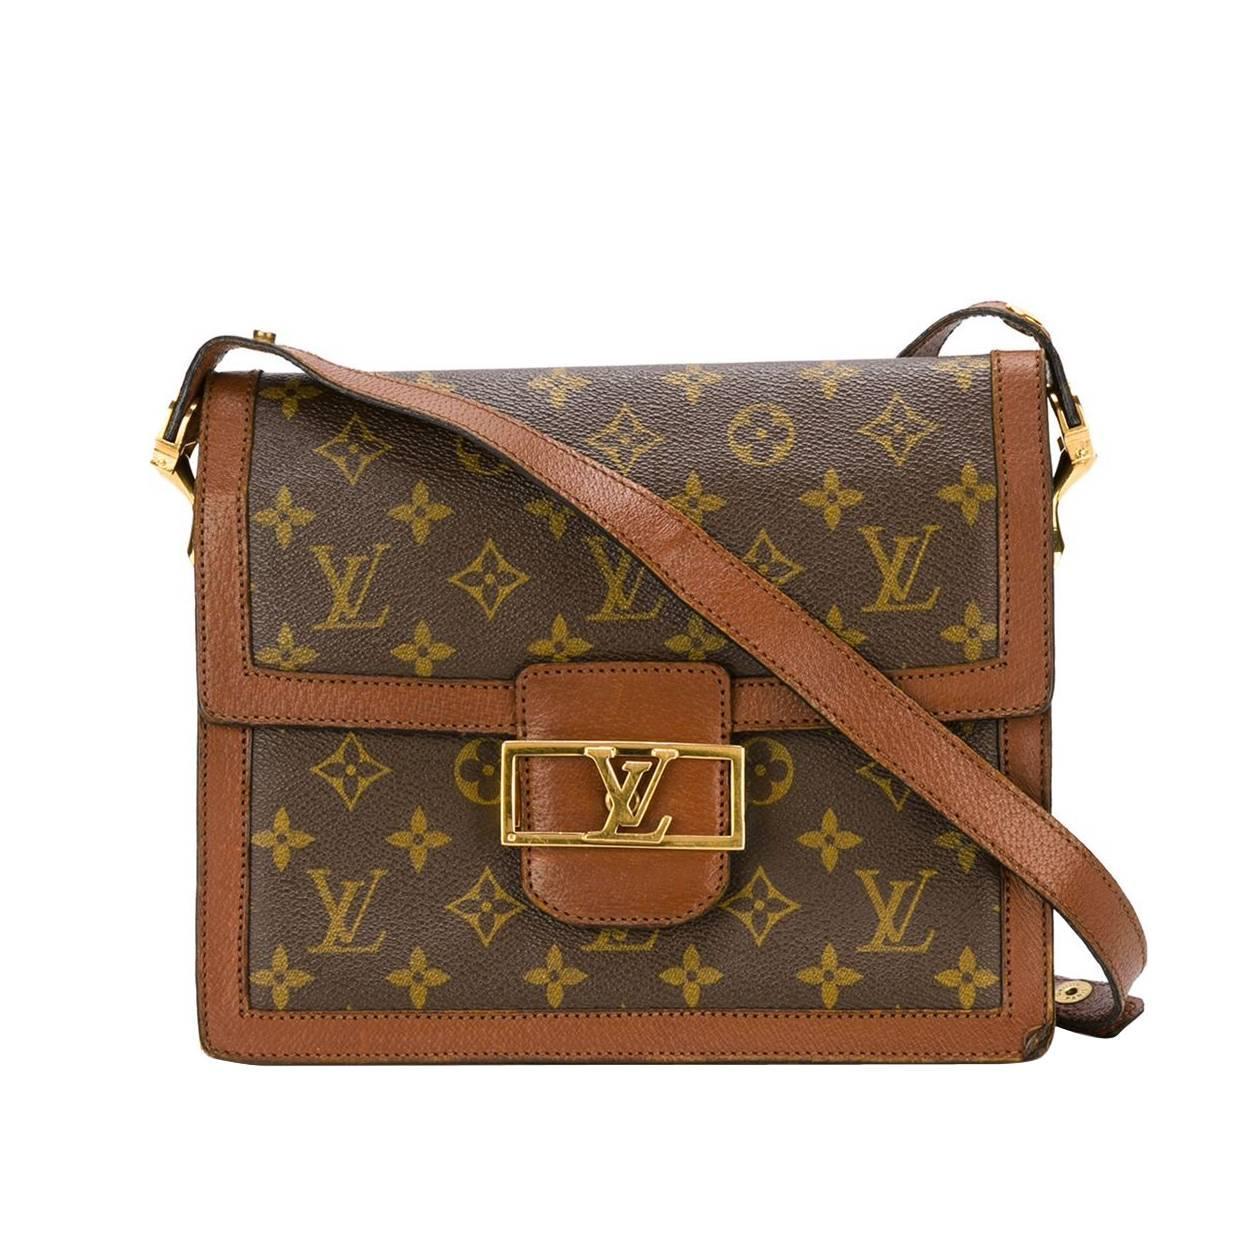 Louis Vuitton Mini Dauphine Bag | Confederated Tribes of the Umatilla Indian Reservation